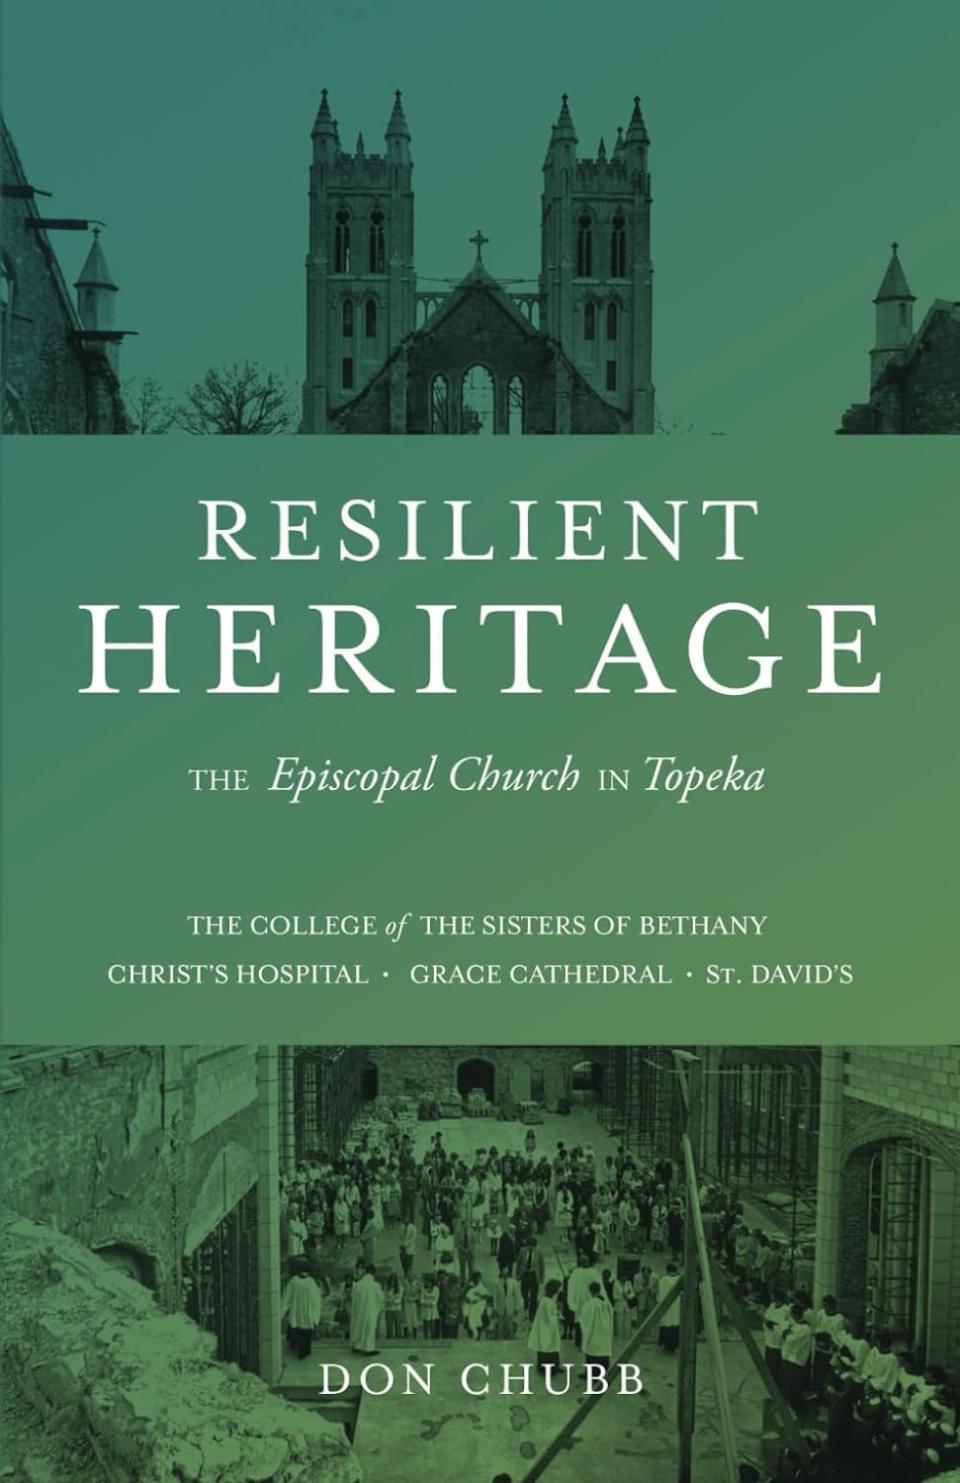 Books by Kansas authors that might make a good last-minute Christmas gift include Topekan Don Chubb's "Resilient Heritage: The Episcopal Church in Topeka: The College of the Sisters of Bethany, Christ’s Hospital, Grace Cathedral, and St. David’s."